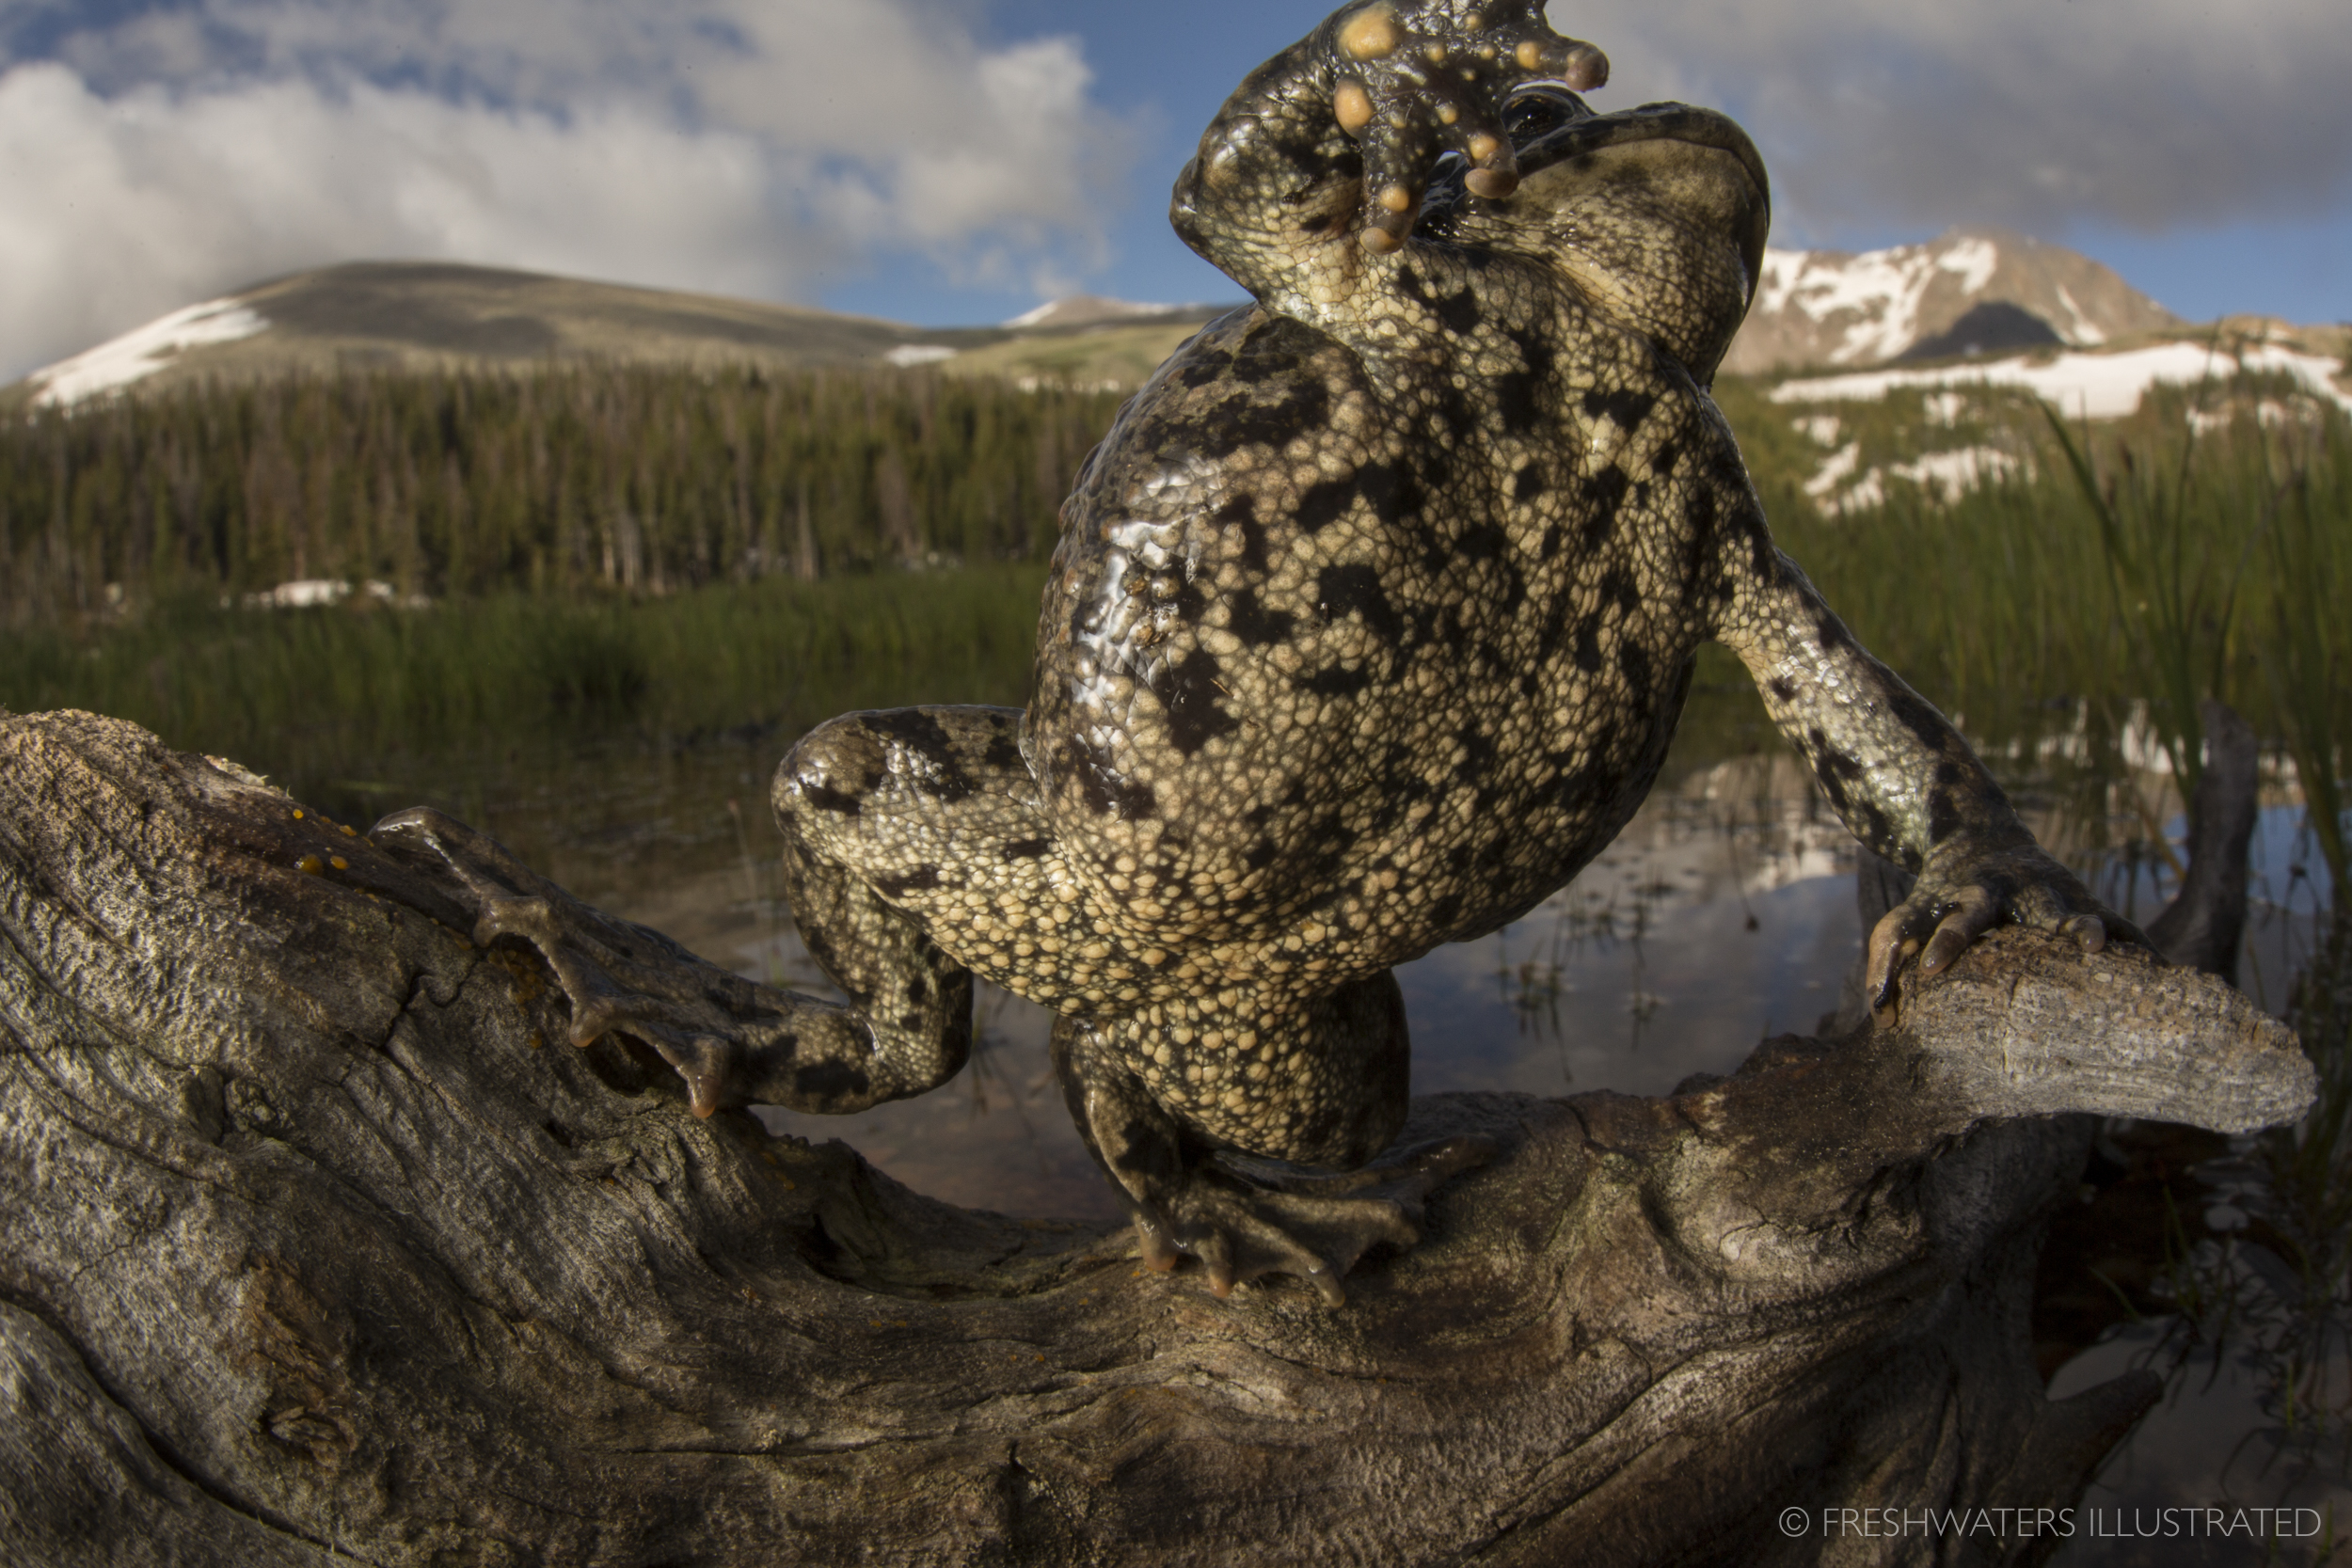  Boreal toad (Anaxyrus boreas) Rocky Mountain National Park, Colorado  www.FreshwatersIllustrated.org  